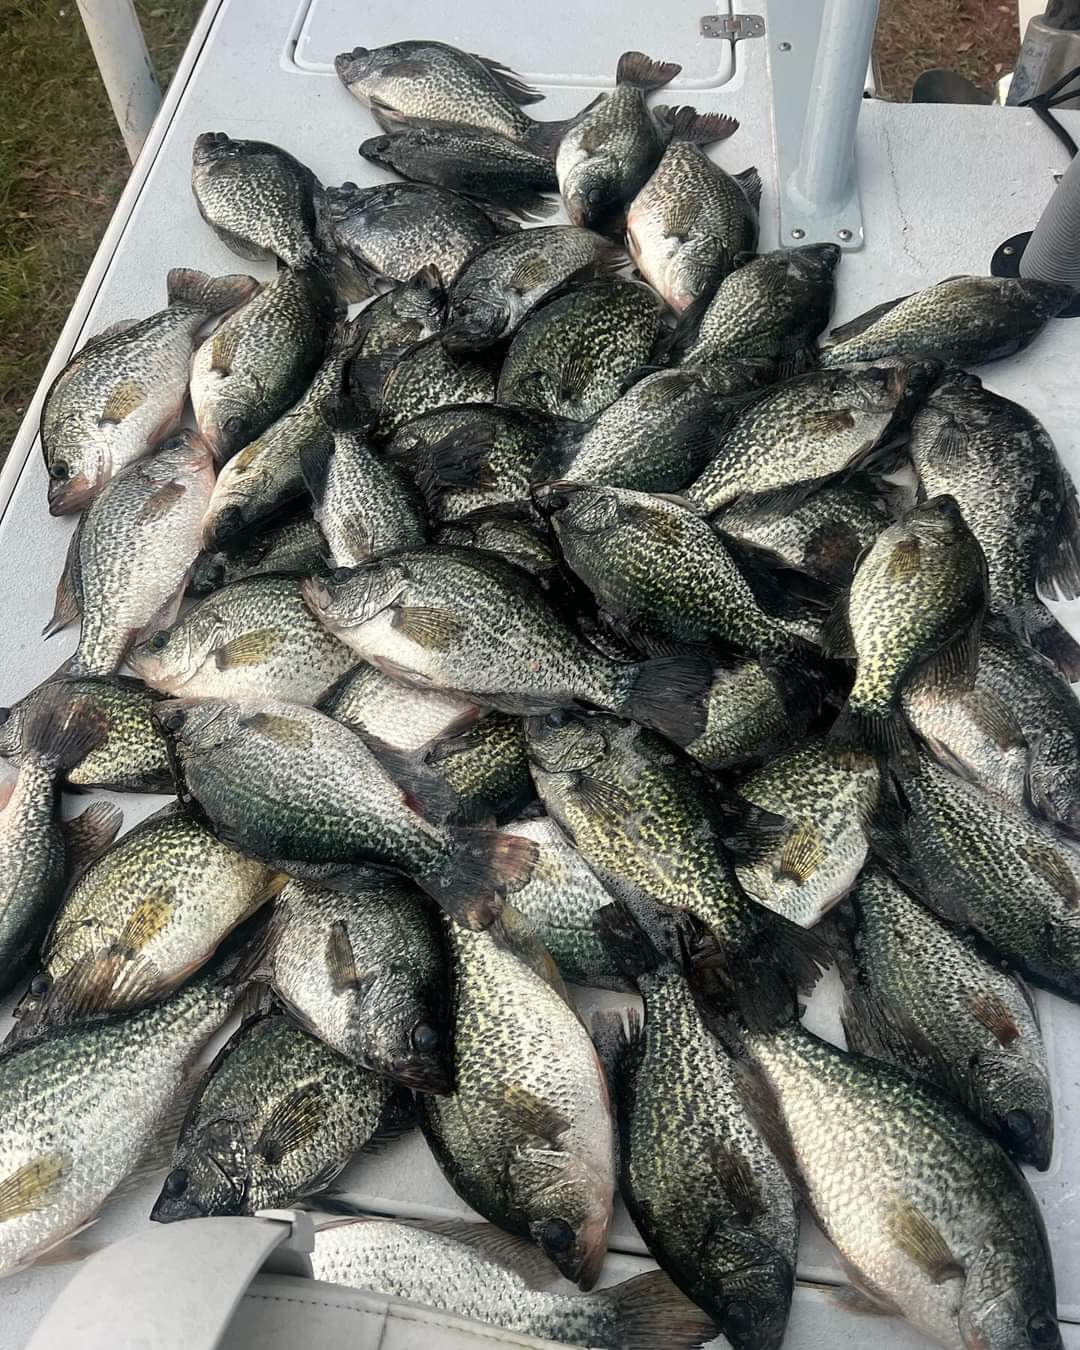 It's speck season, says Capt. Rob Ward of S & K Fisheries in Fort Pierce. These Lake Okeechobee speckled perch were caught in an hour Dec. 10, 2023.